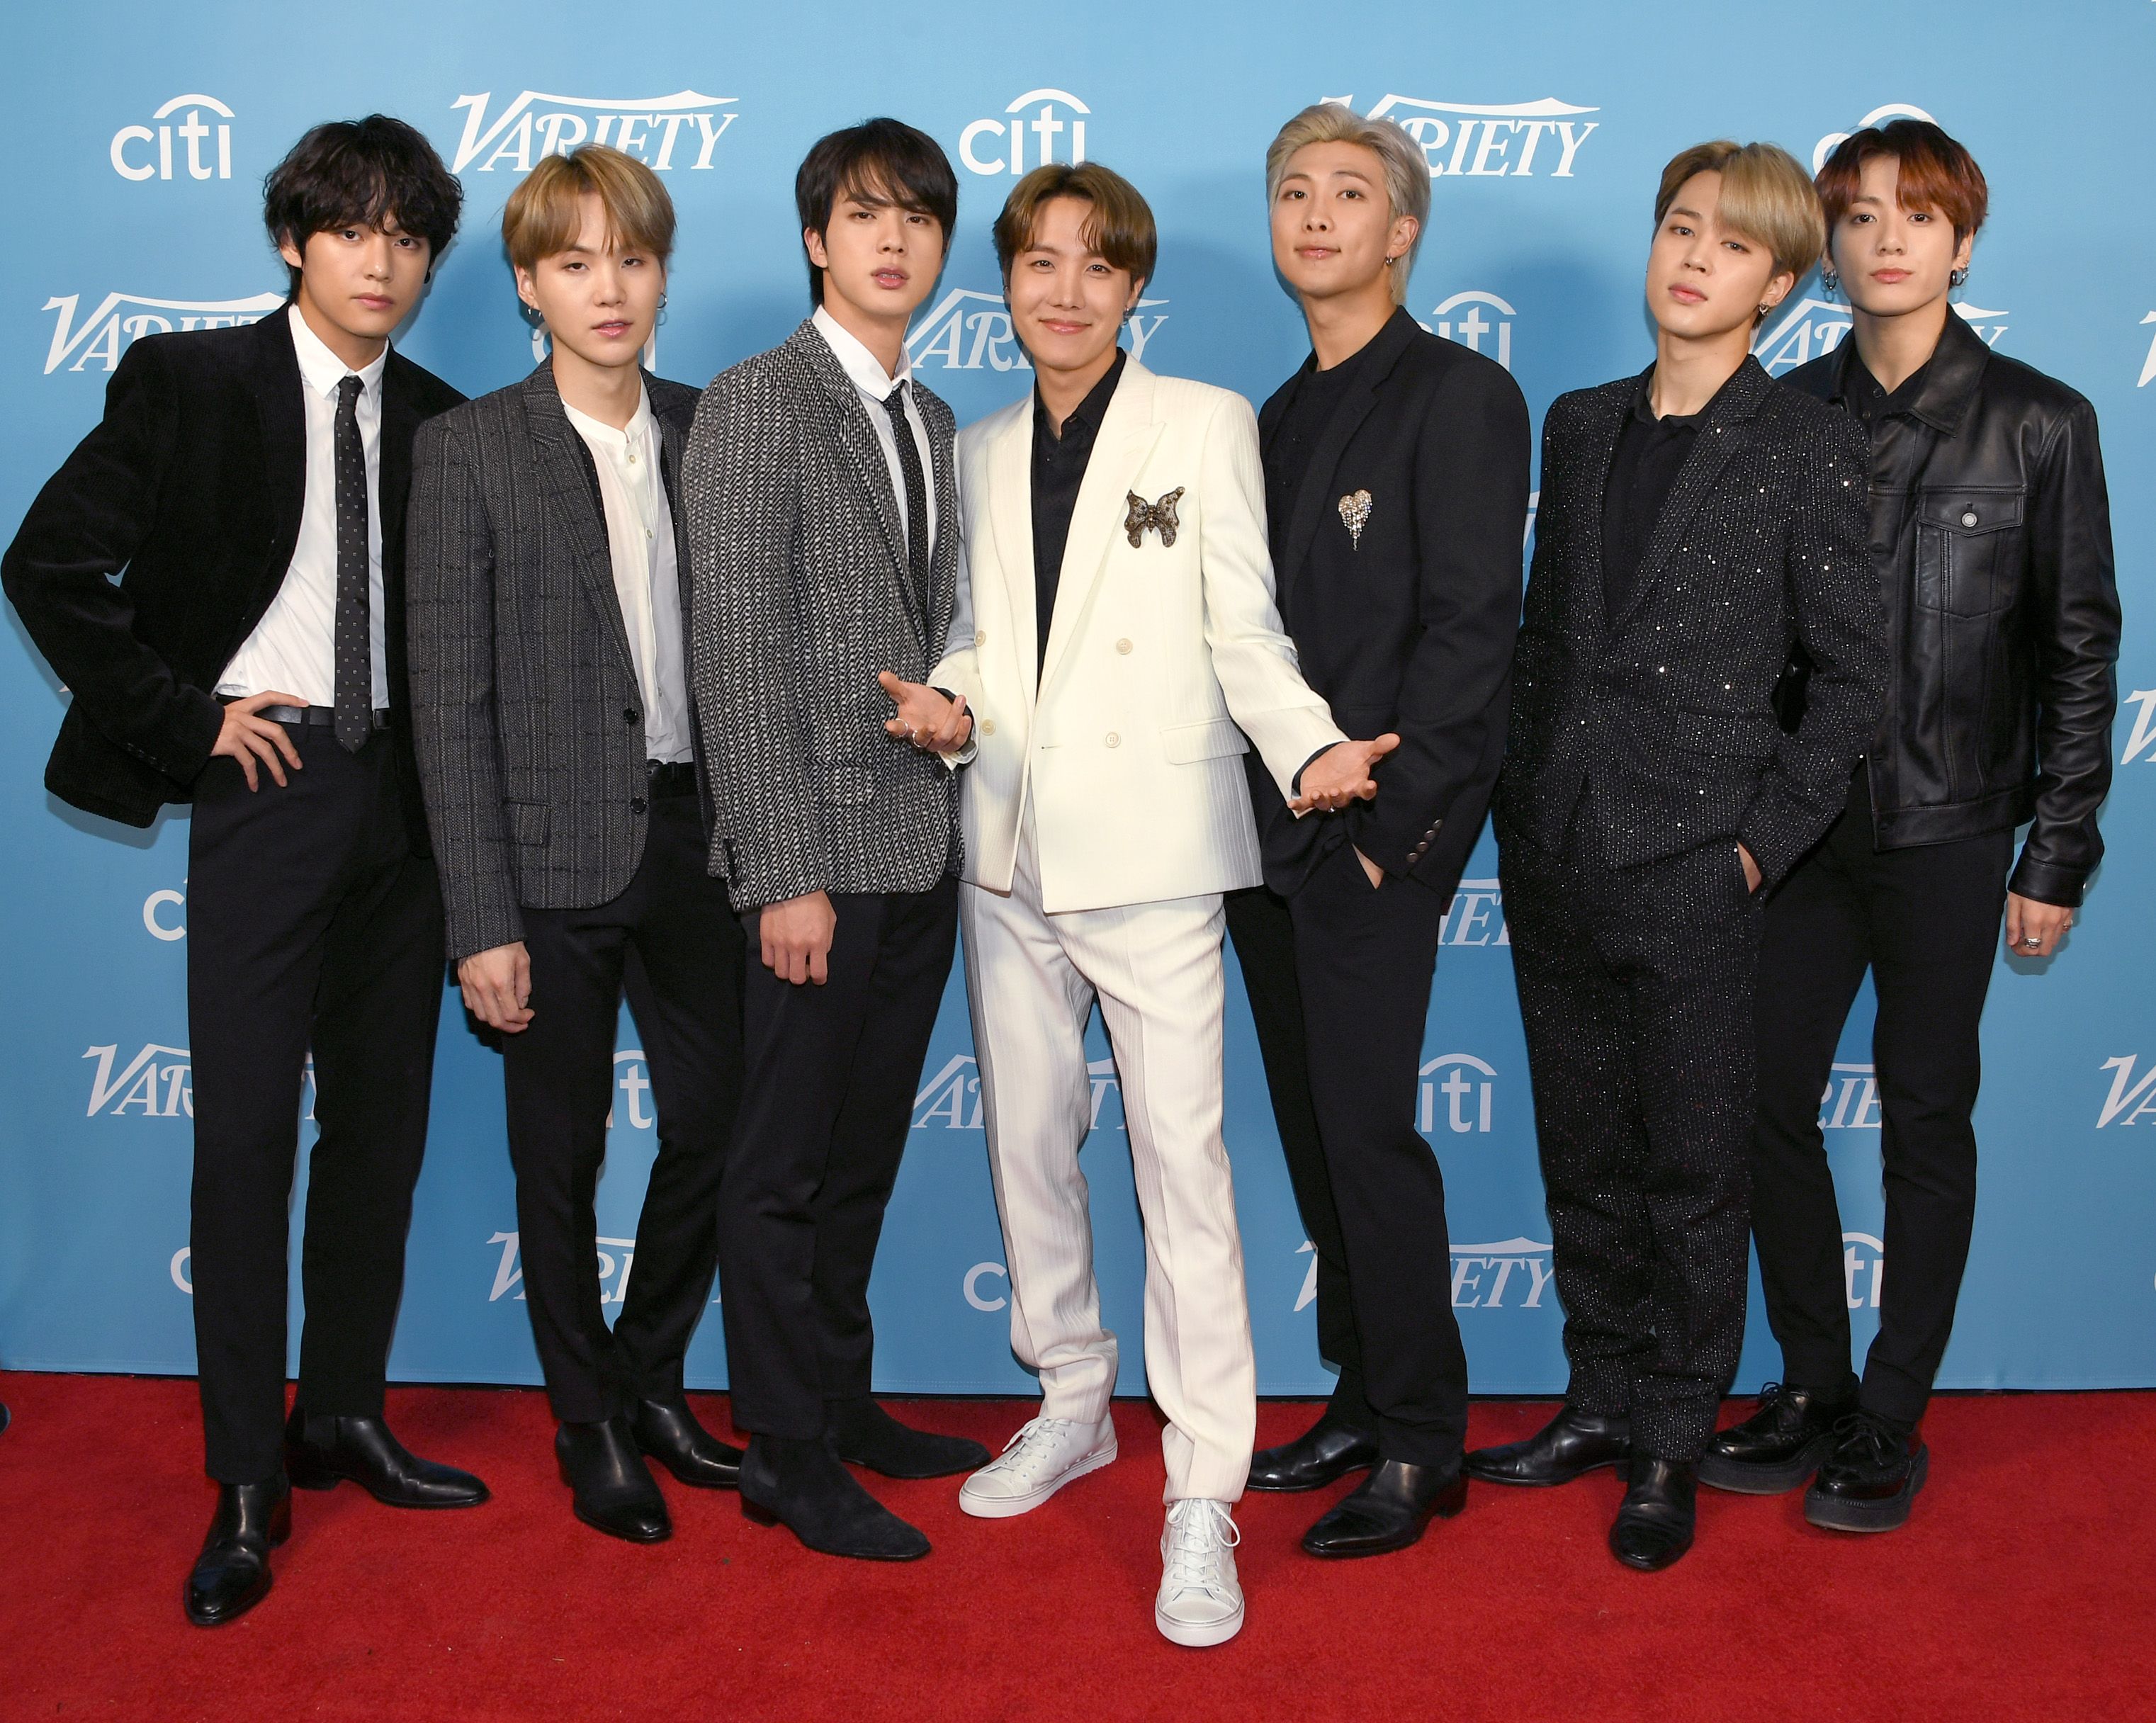 jin-j-hope-rm-jimin-and-jungkook-of-bts-attend-the-2019-news-photo-1594627765.jpg